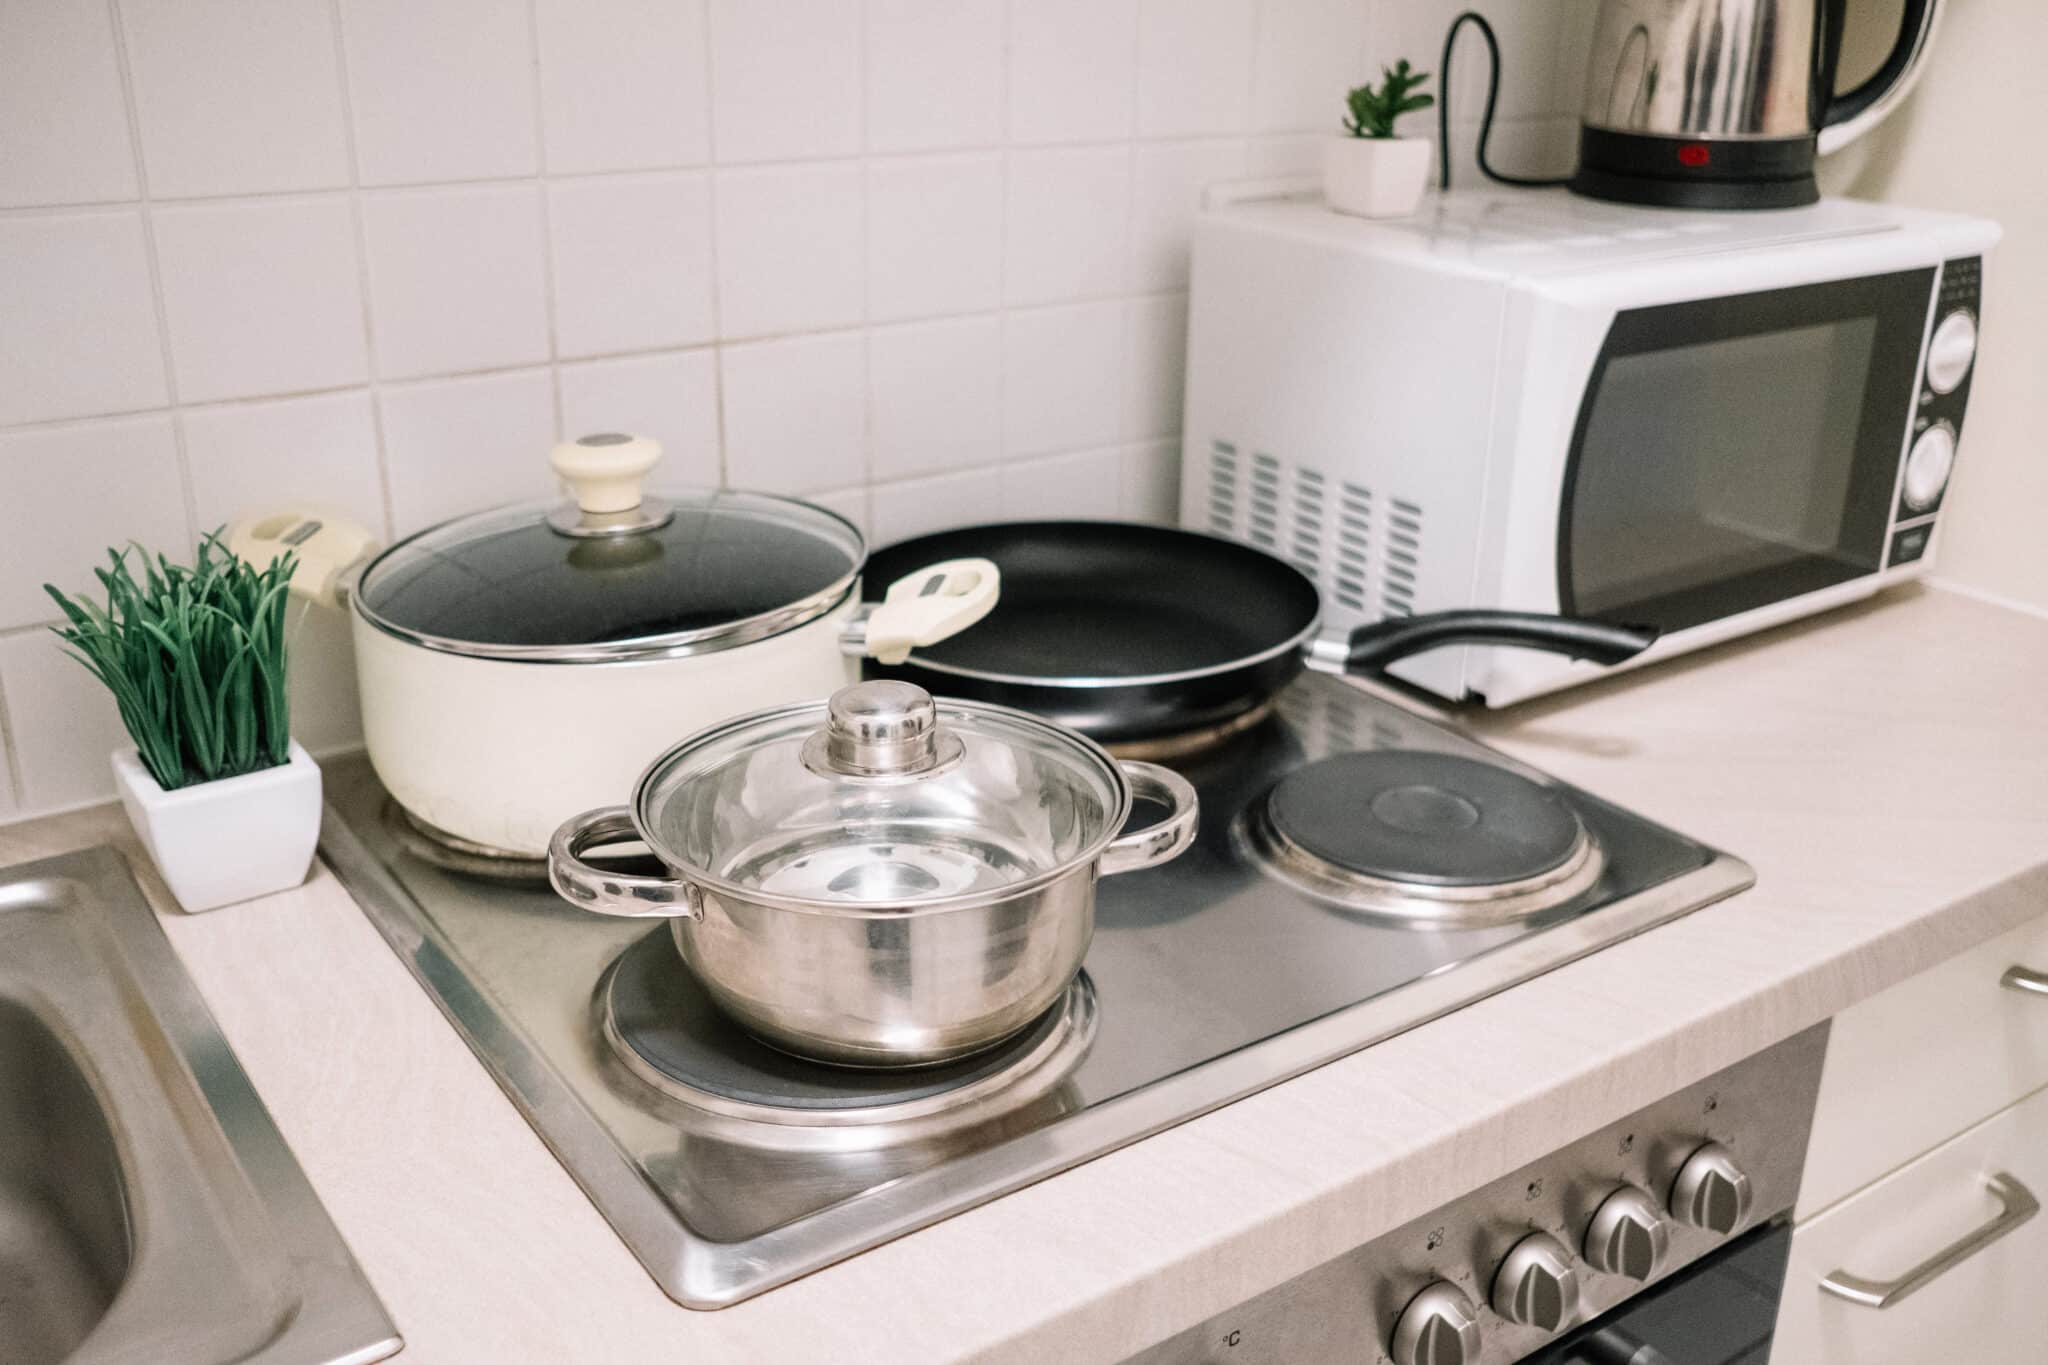 Can You Use Stainless Steel Pans In The Microwave Oven?